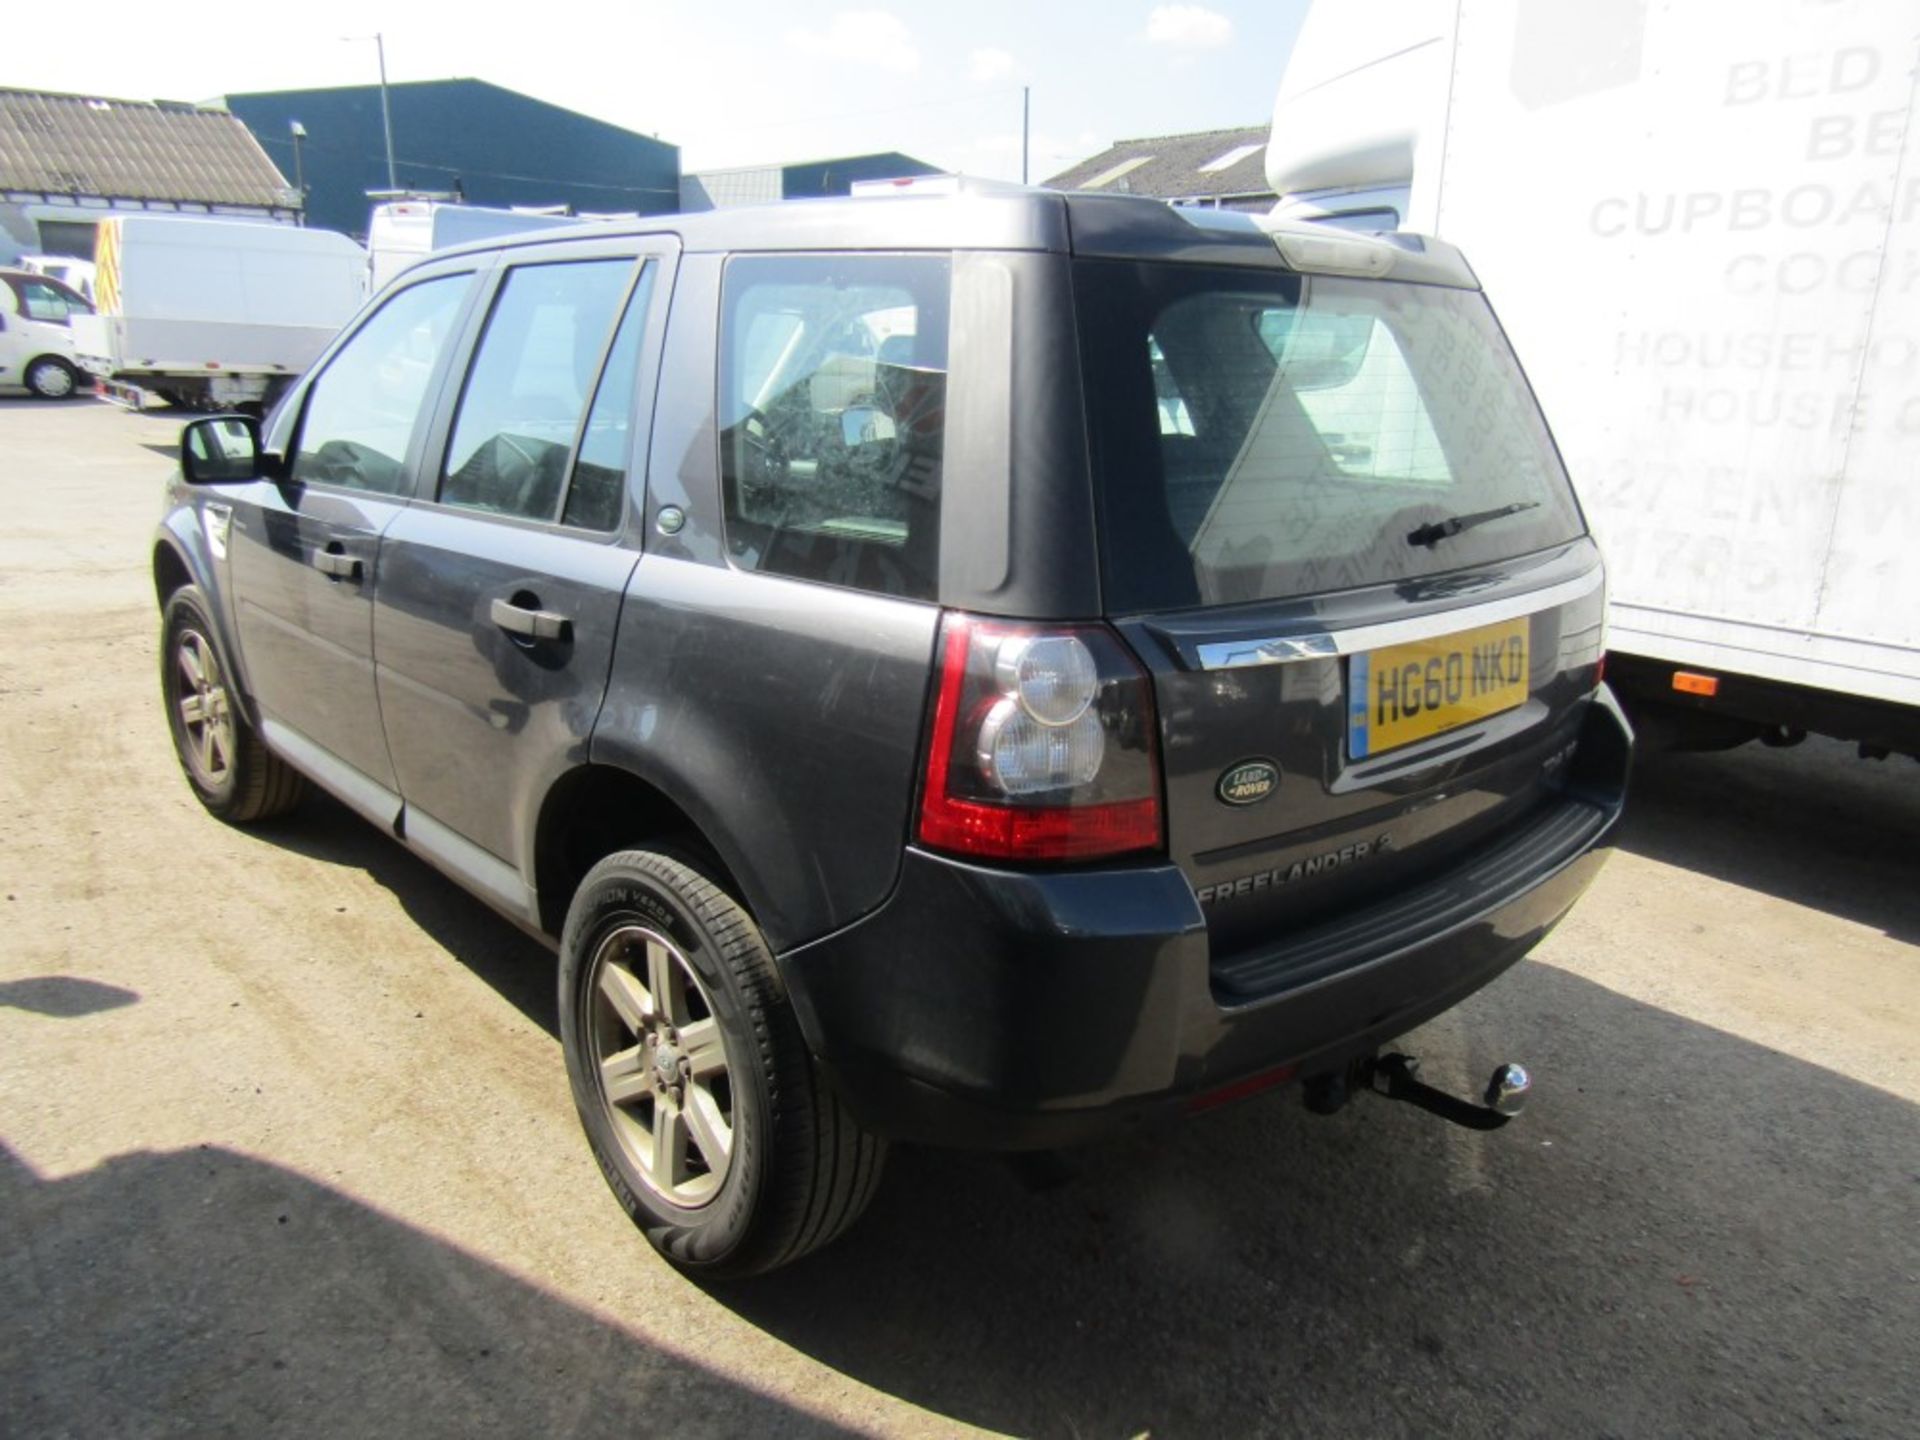 60 reg LAND ROVER FREELANDER 2 (JUMPS OUT OF 6TH GEAR) 1ST REG 10/10, TEST 12/22, 166149M NOT - Image 3 of 6